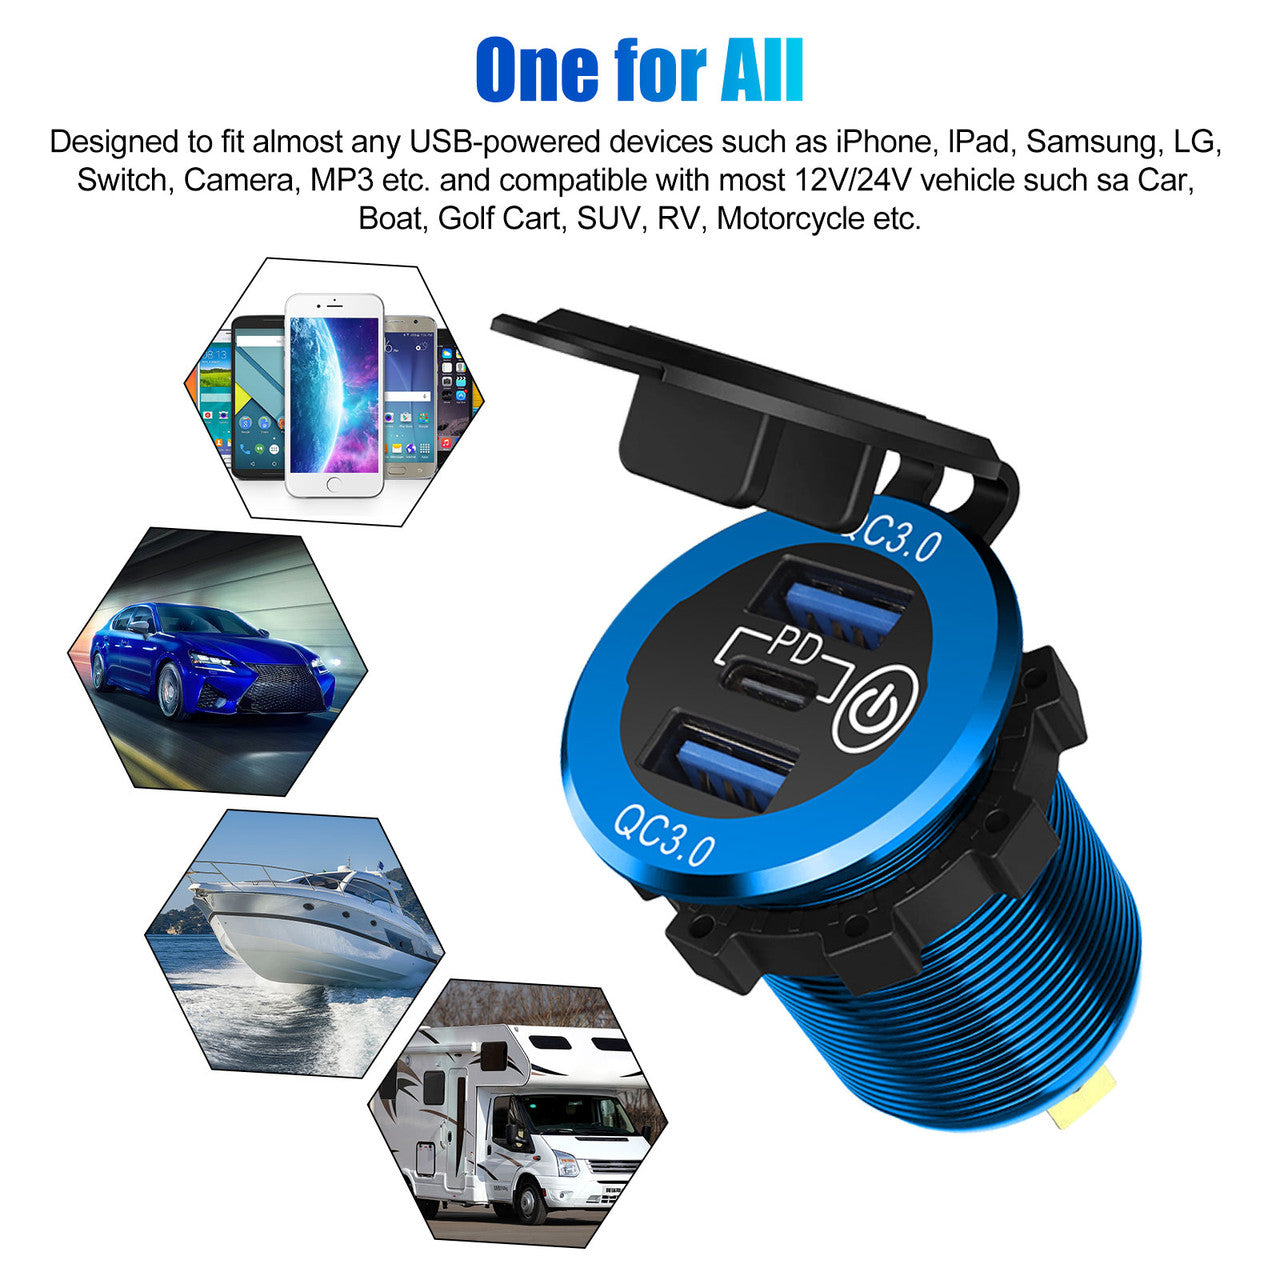 QC3.0 PD Fast Car Charger Socket with Dual USB Ports and a Metal Body, Blue